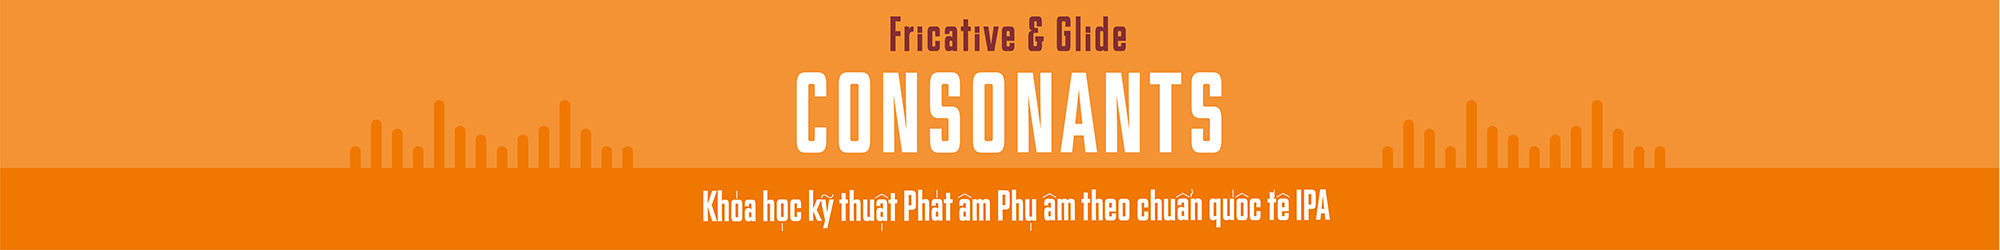 Consonants in the IPA (Fricative & Glide) banner